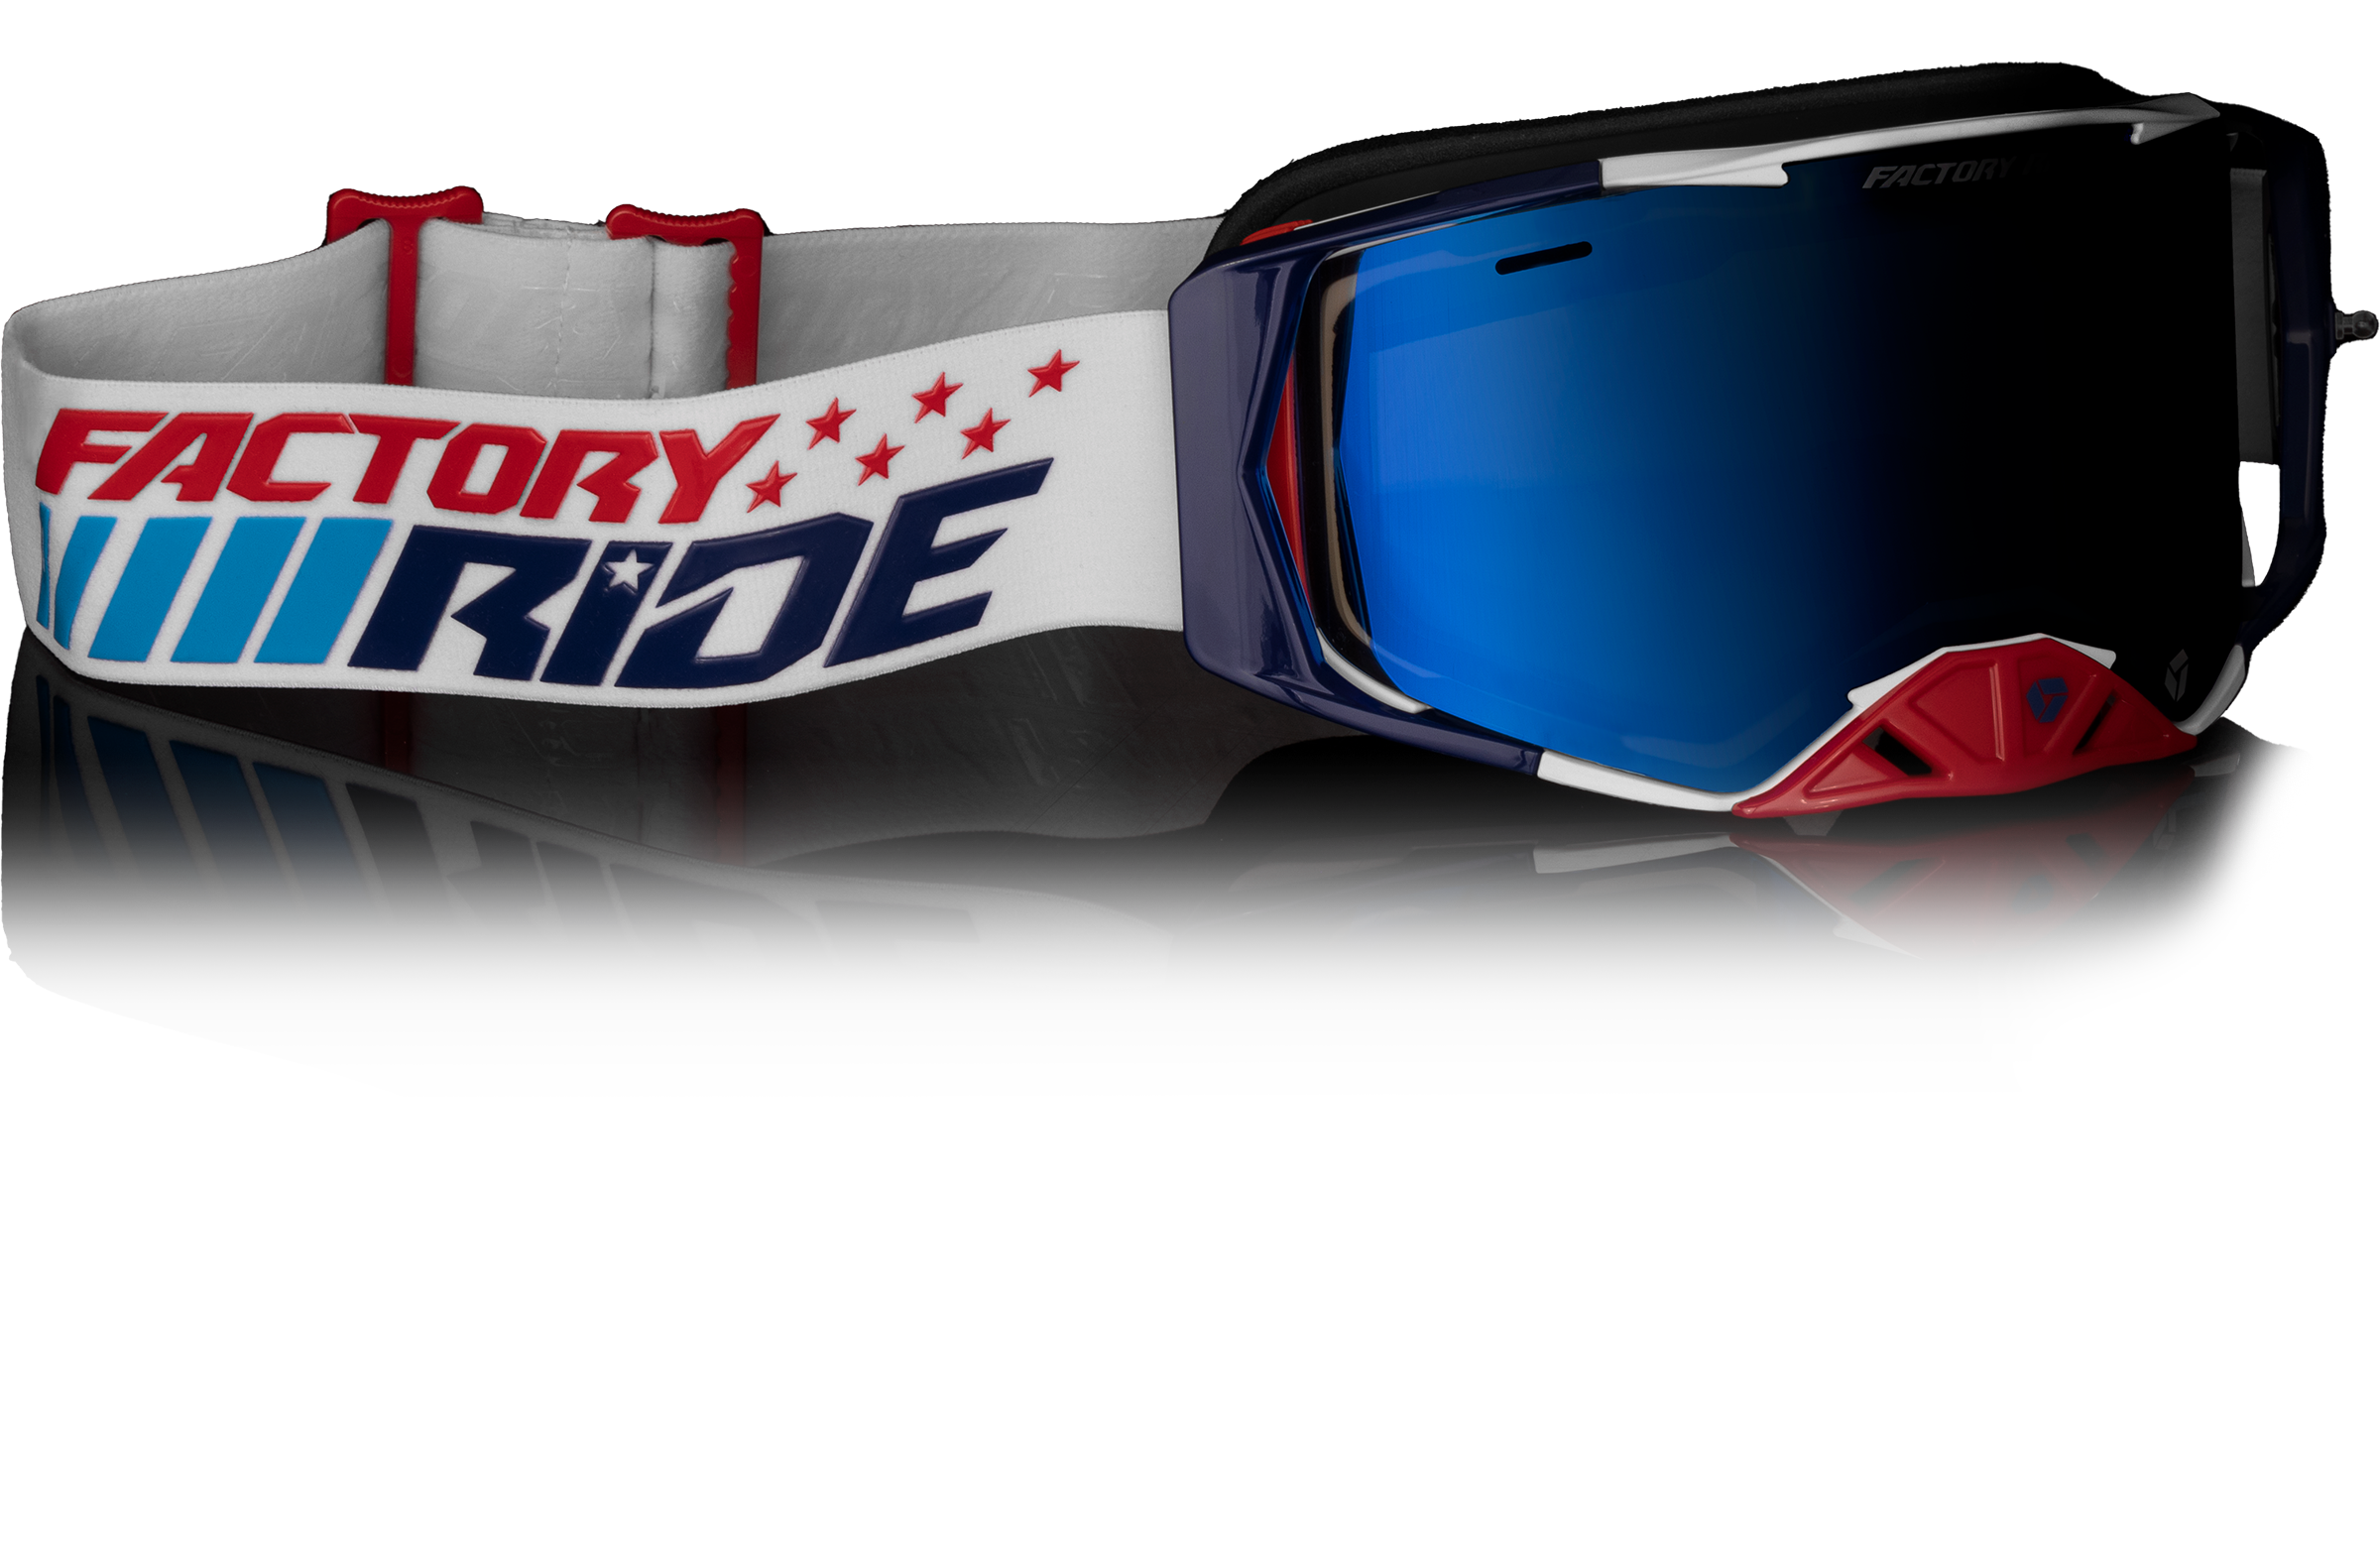 Factory Ride Snow Goggle Image featuring the patriot colorway